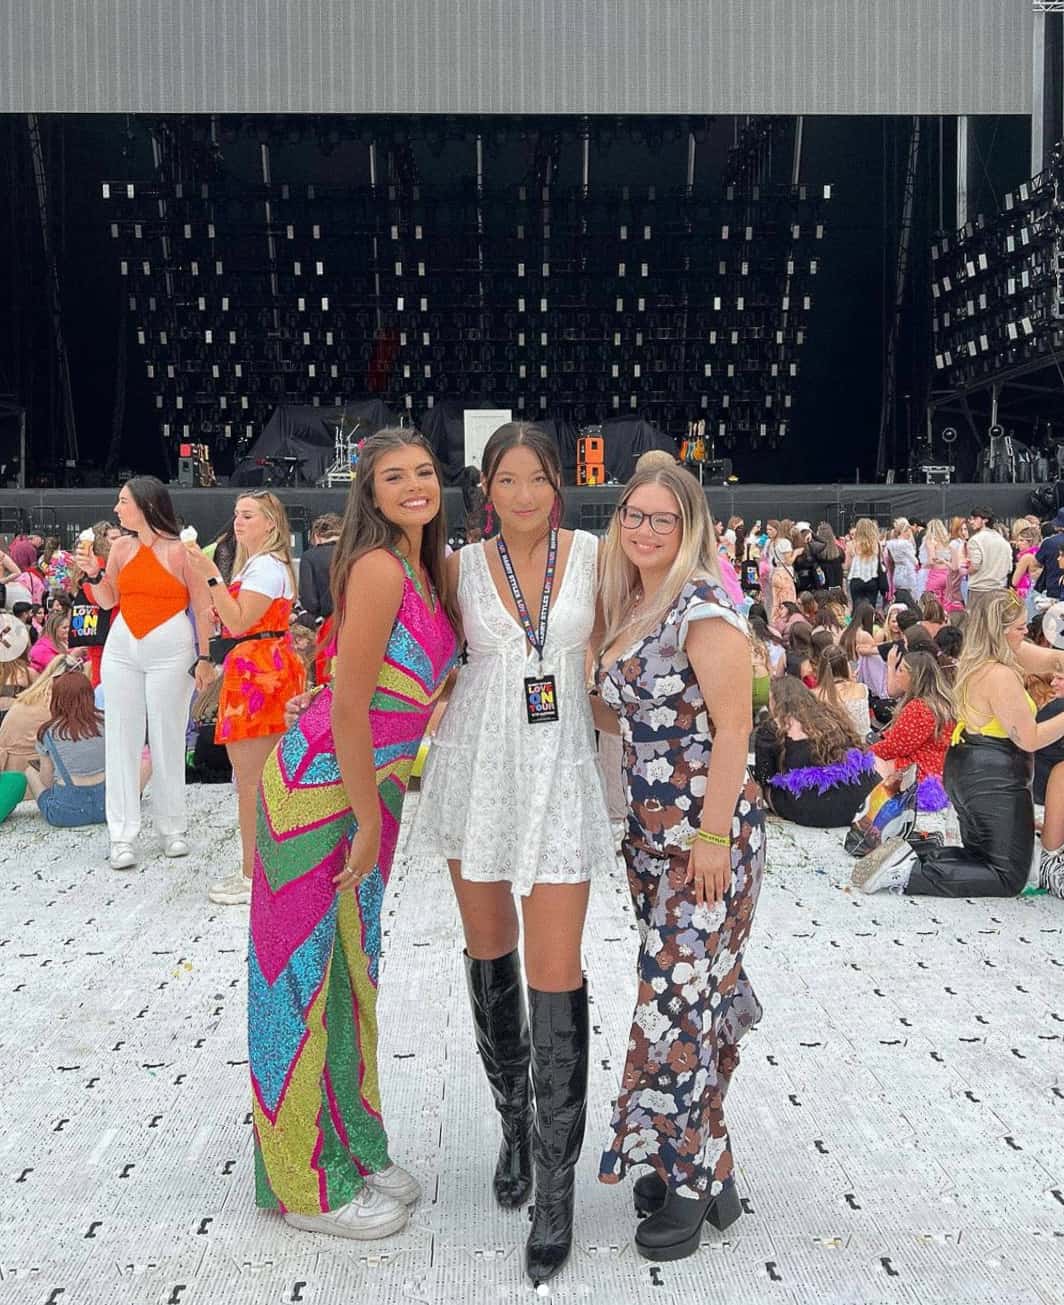 Three woman standing together with Harry Styles concert outfits